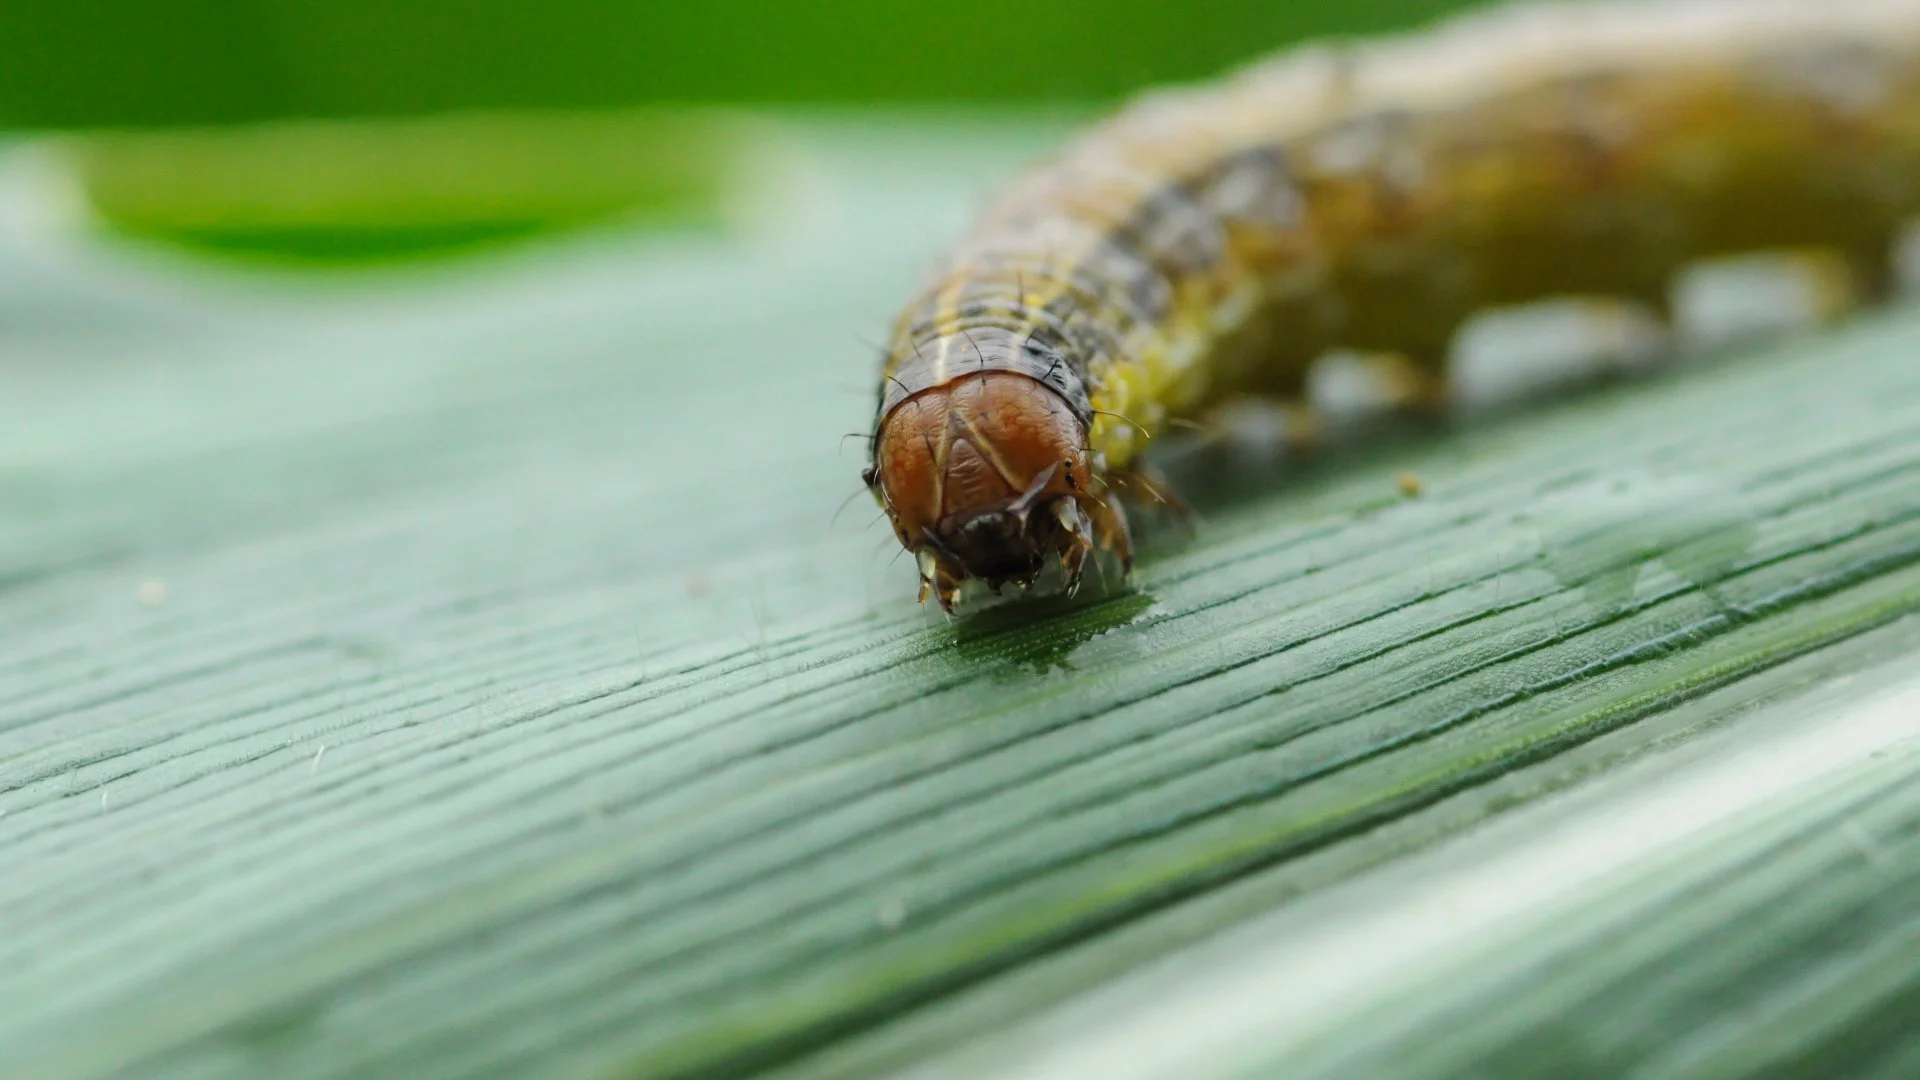 Close up on an armyworm found on a leaf by our potential client's home in Yardley, PA.